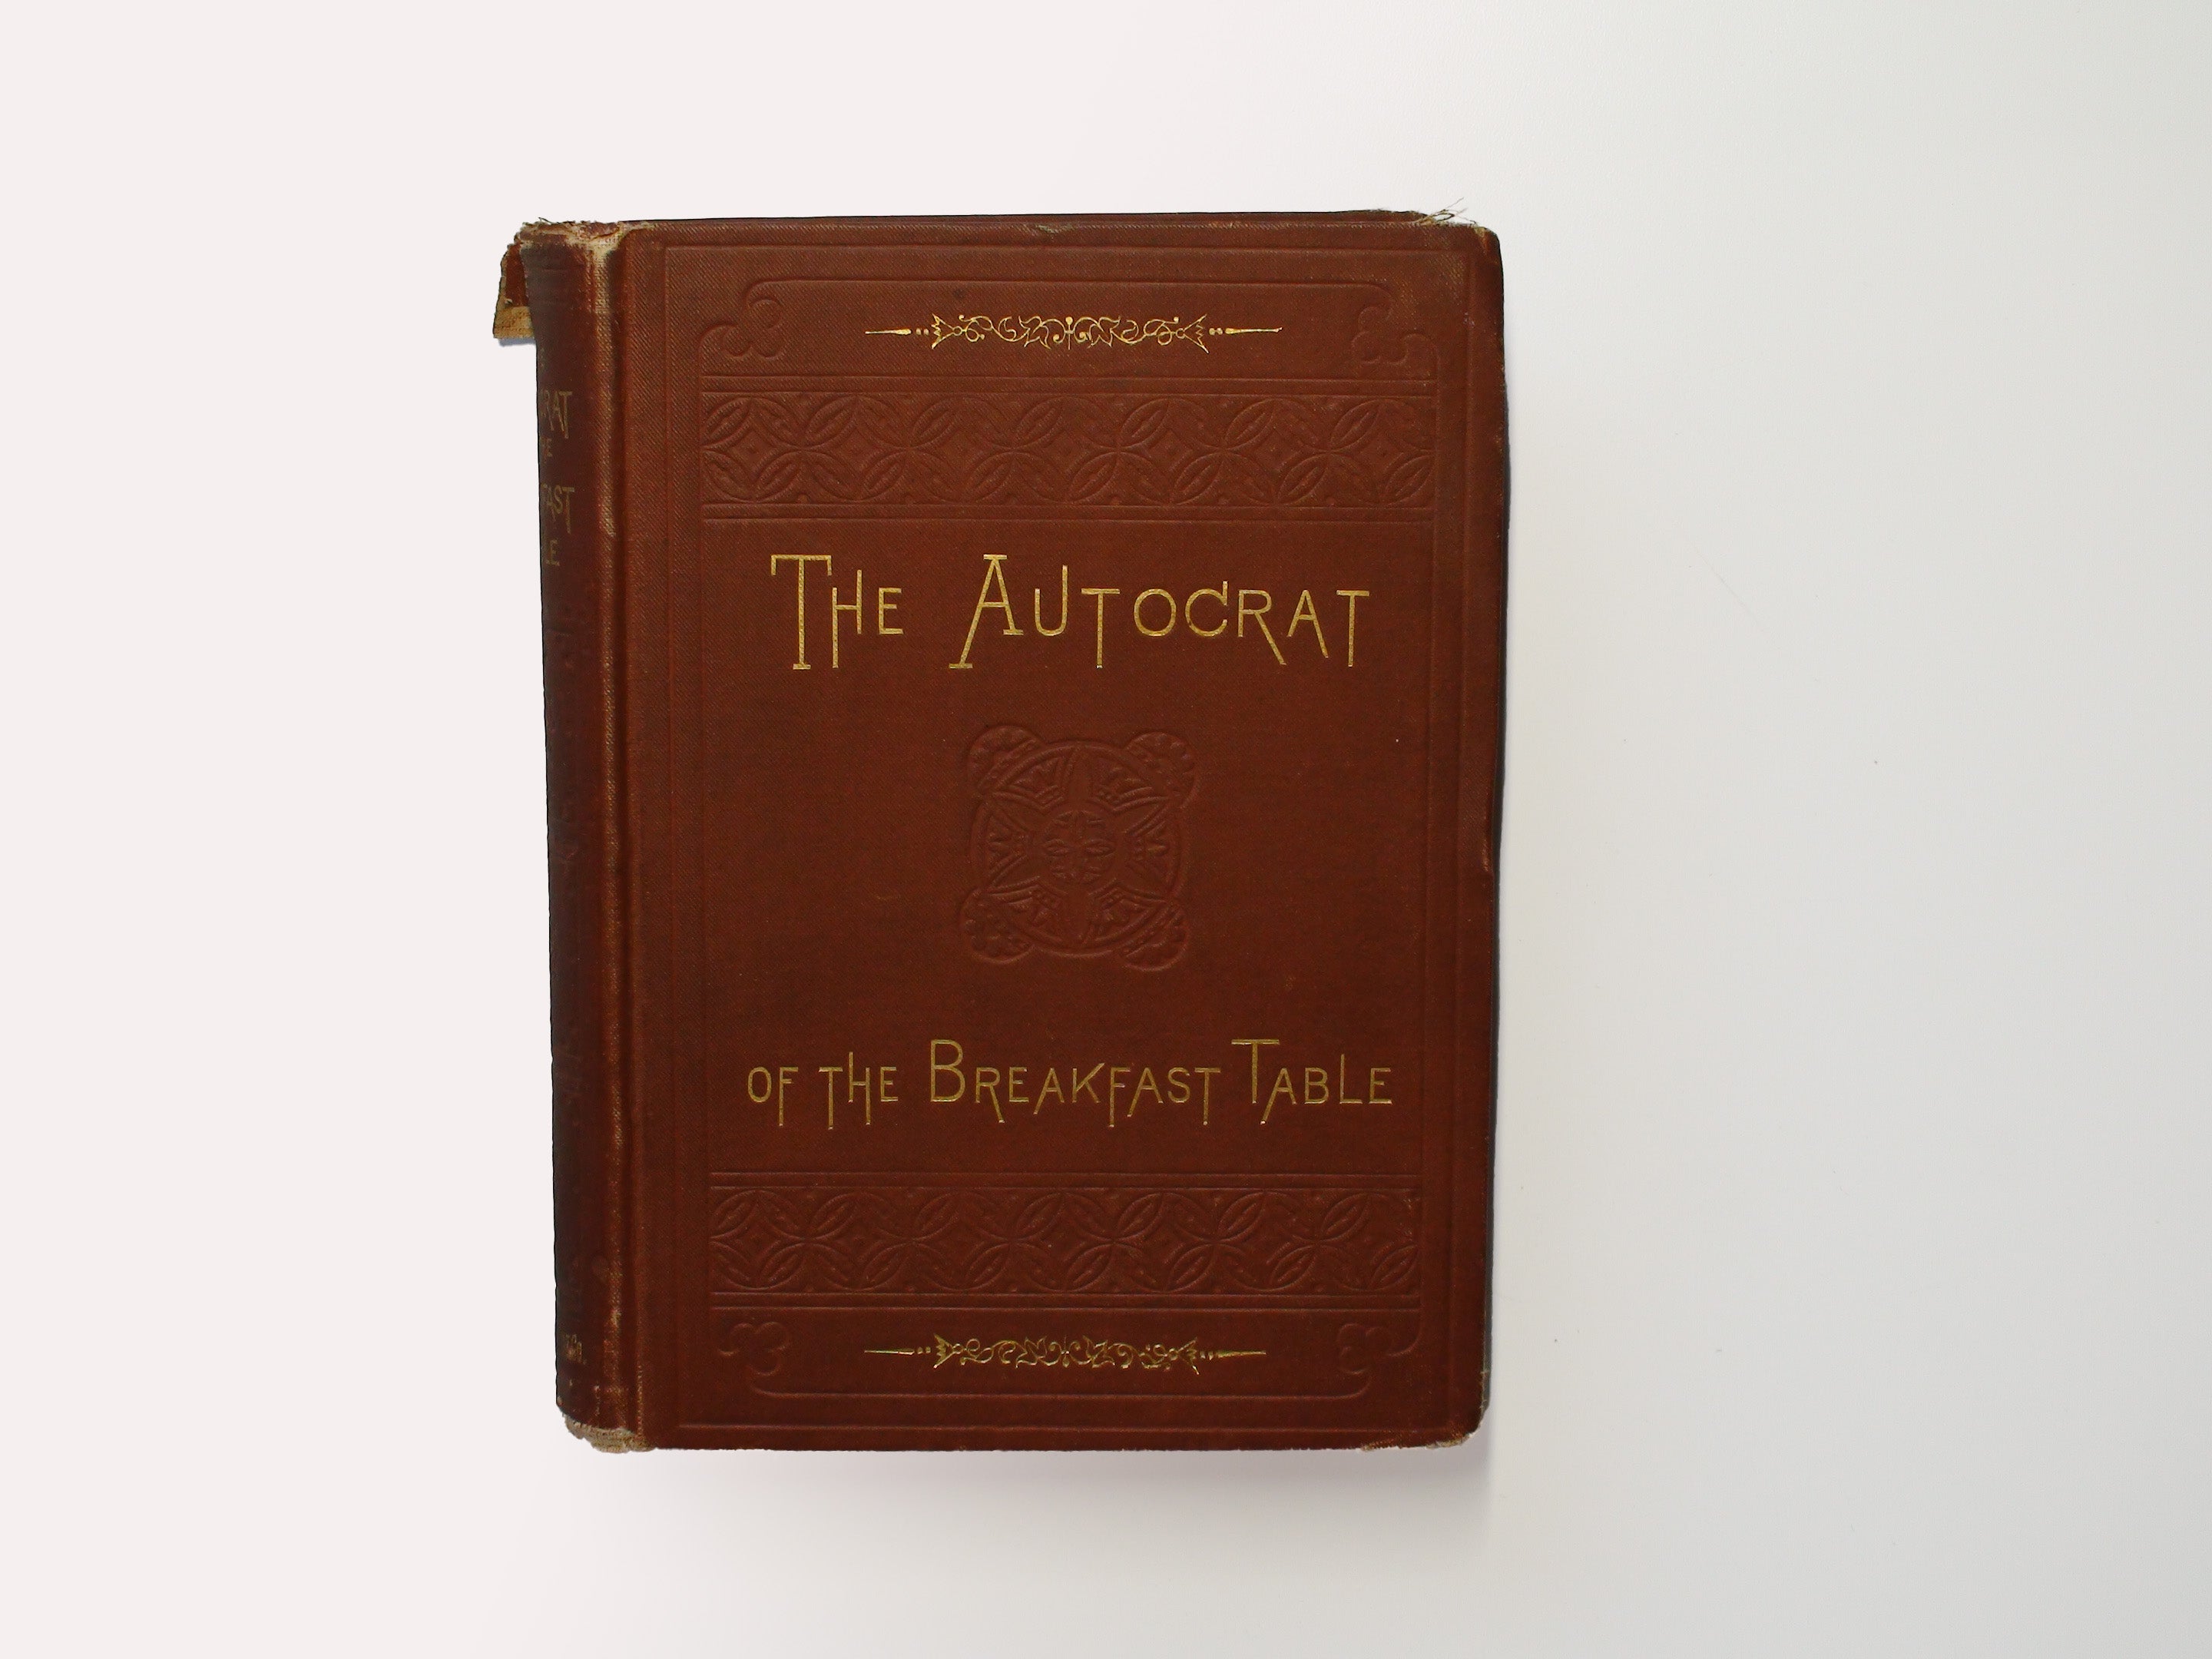 The Autocrat of the Breakfast Table, by Oliver Wendell Holmes., 1880